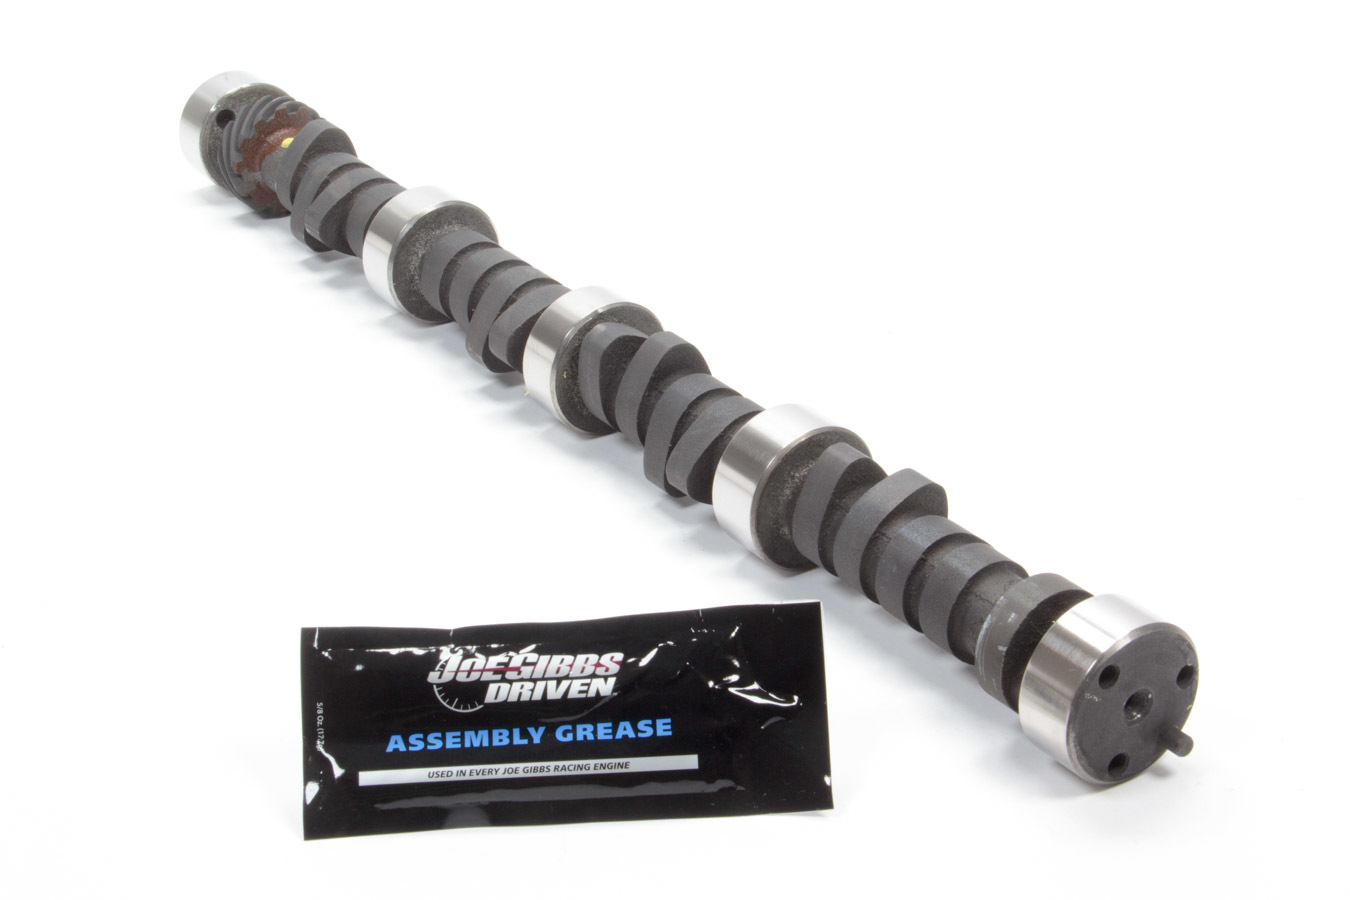 Howards Cams 111241-12 Camshaft, Oval Track Lift Rule, Hydraulic Flat Tappet, Lift 0.450 / 0.450 in, Duration 276 / 284, 112 LSA, 2400 / 6400 RPM, Small Block Chevy, Each